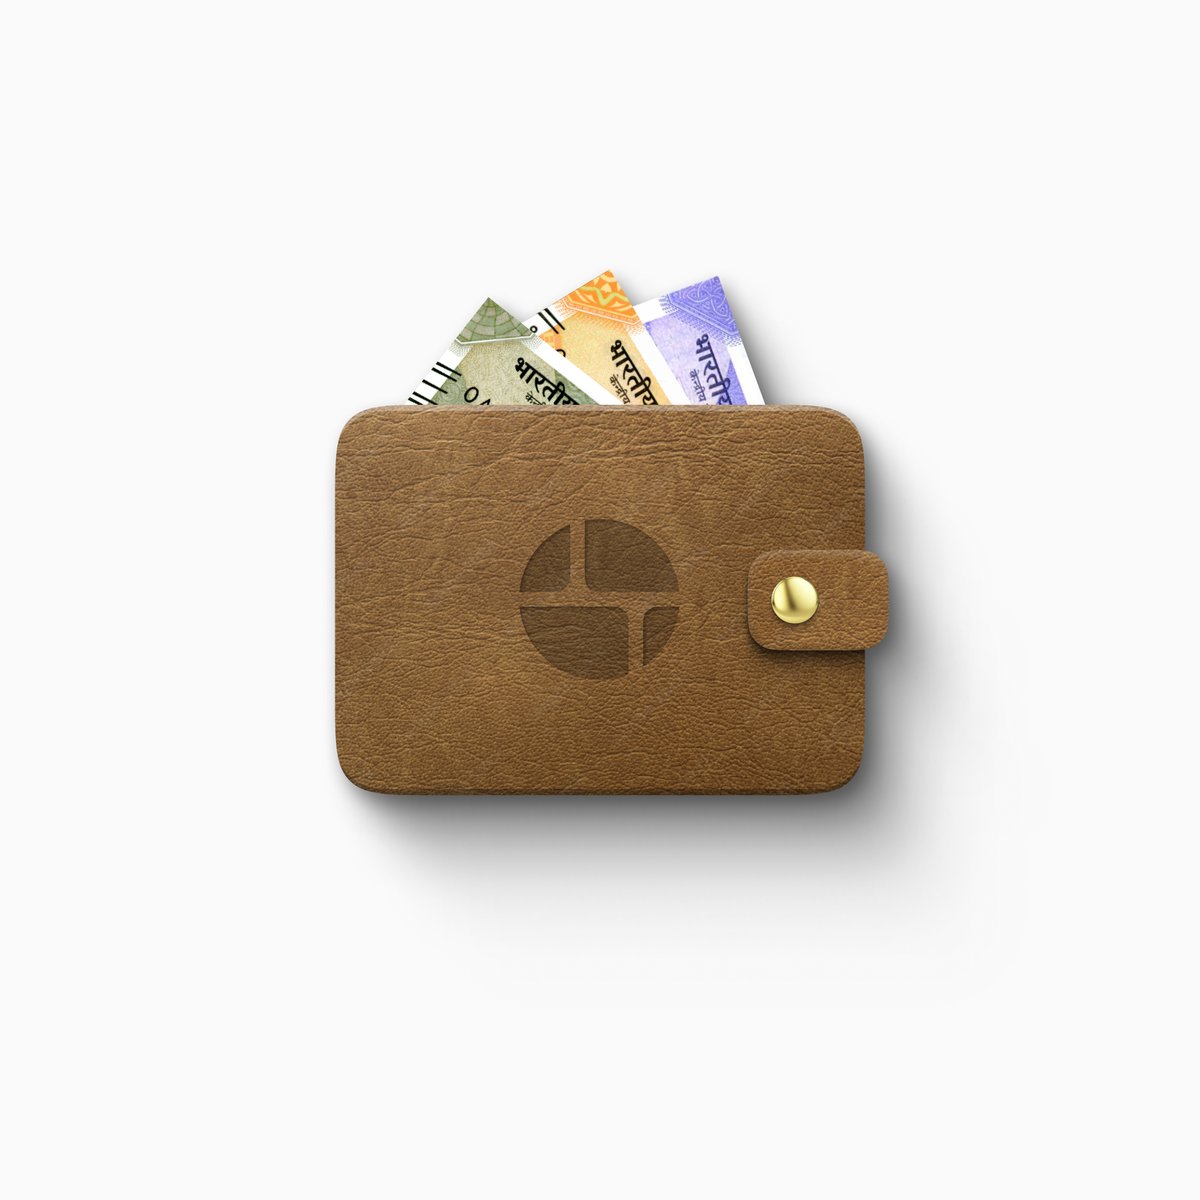 Wallet asset for a project